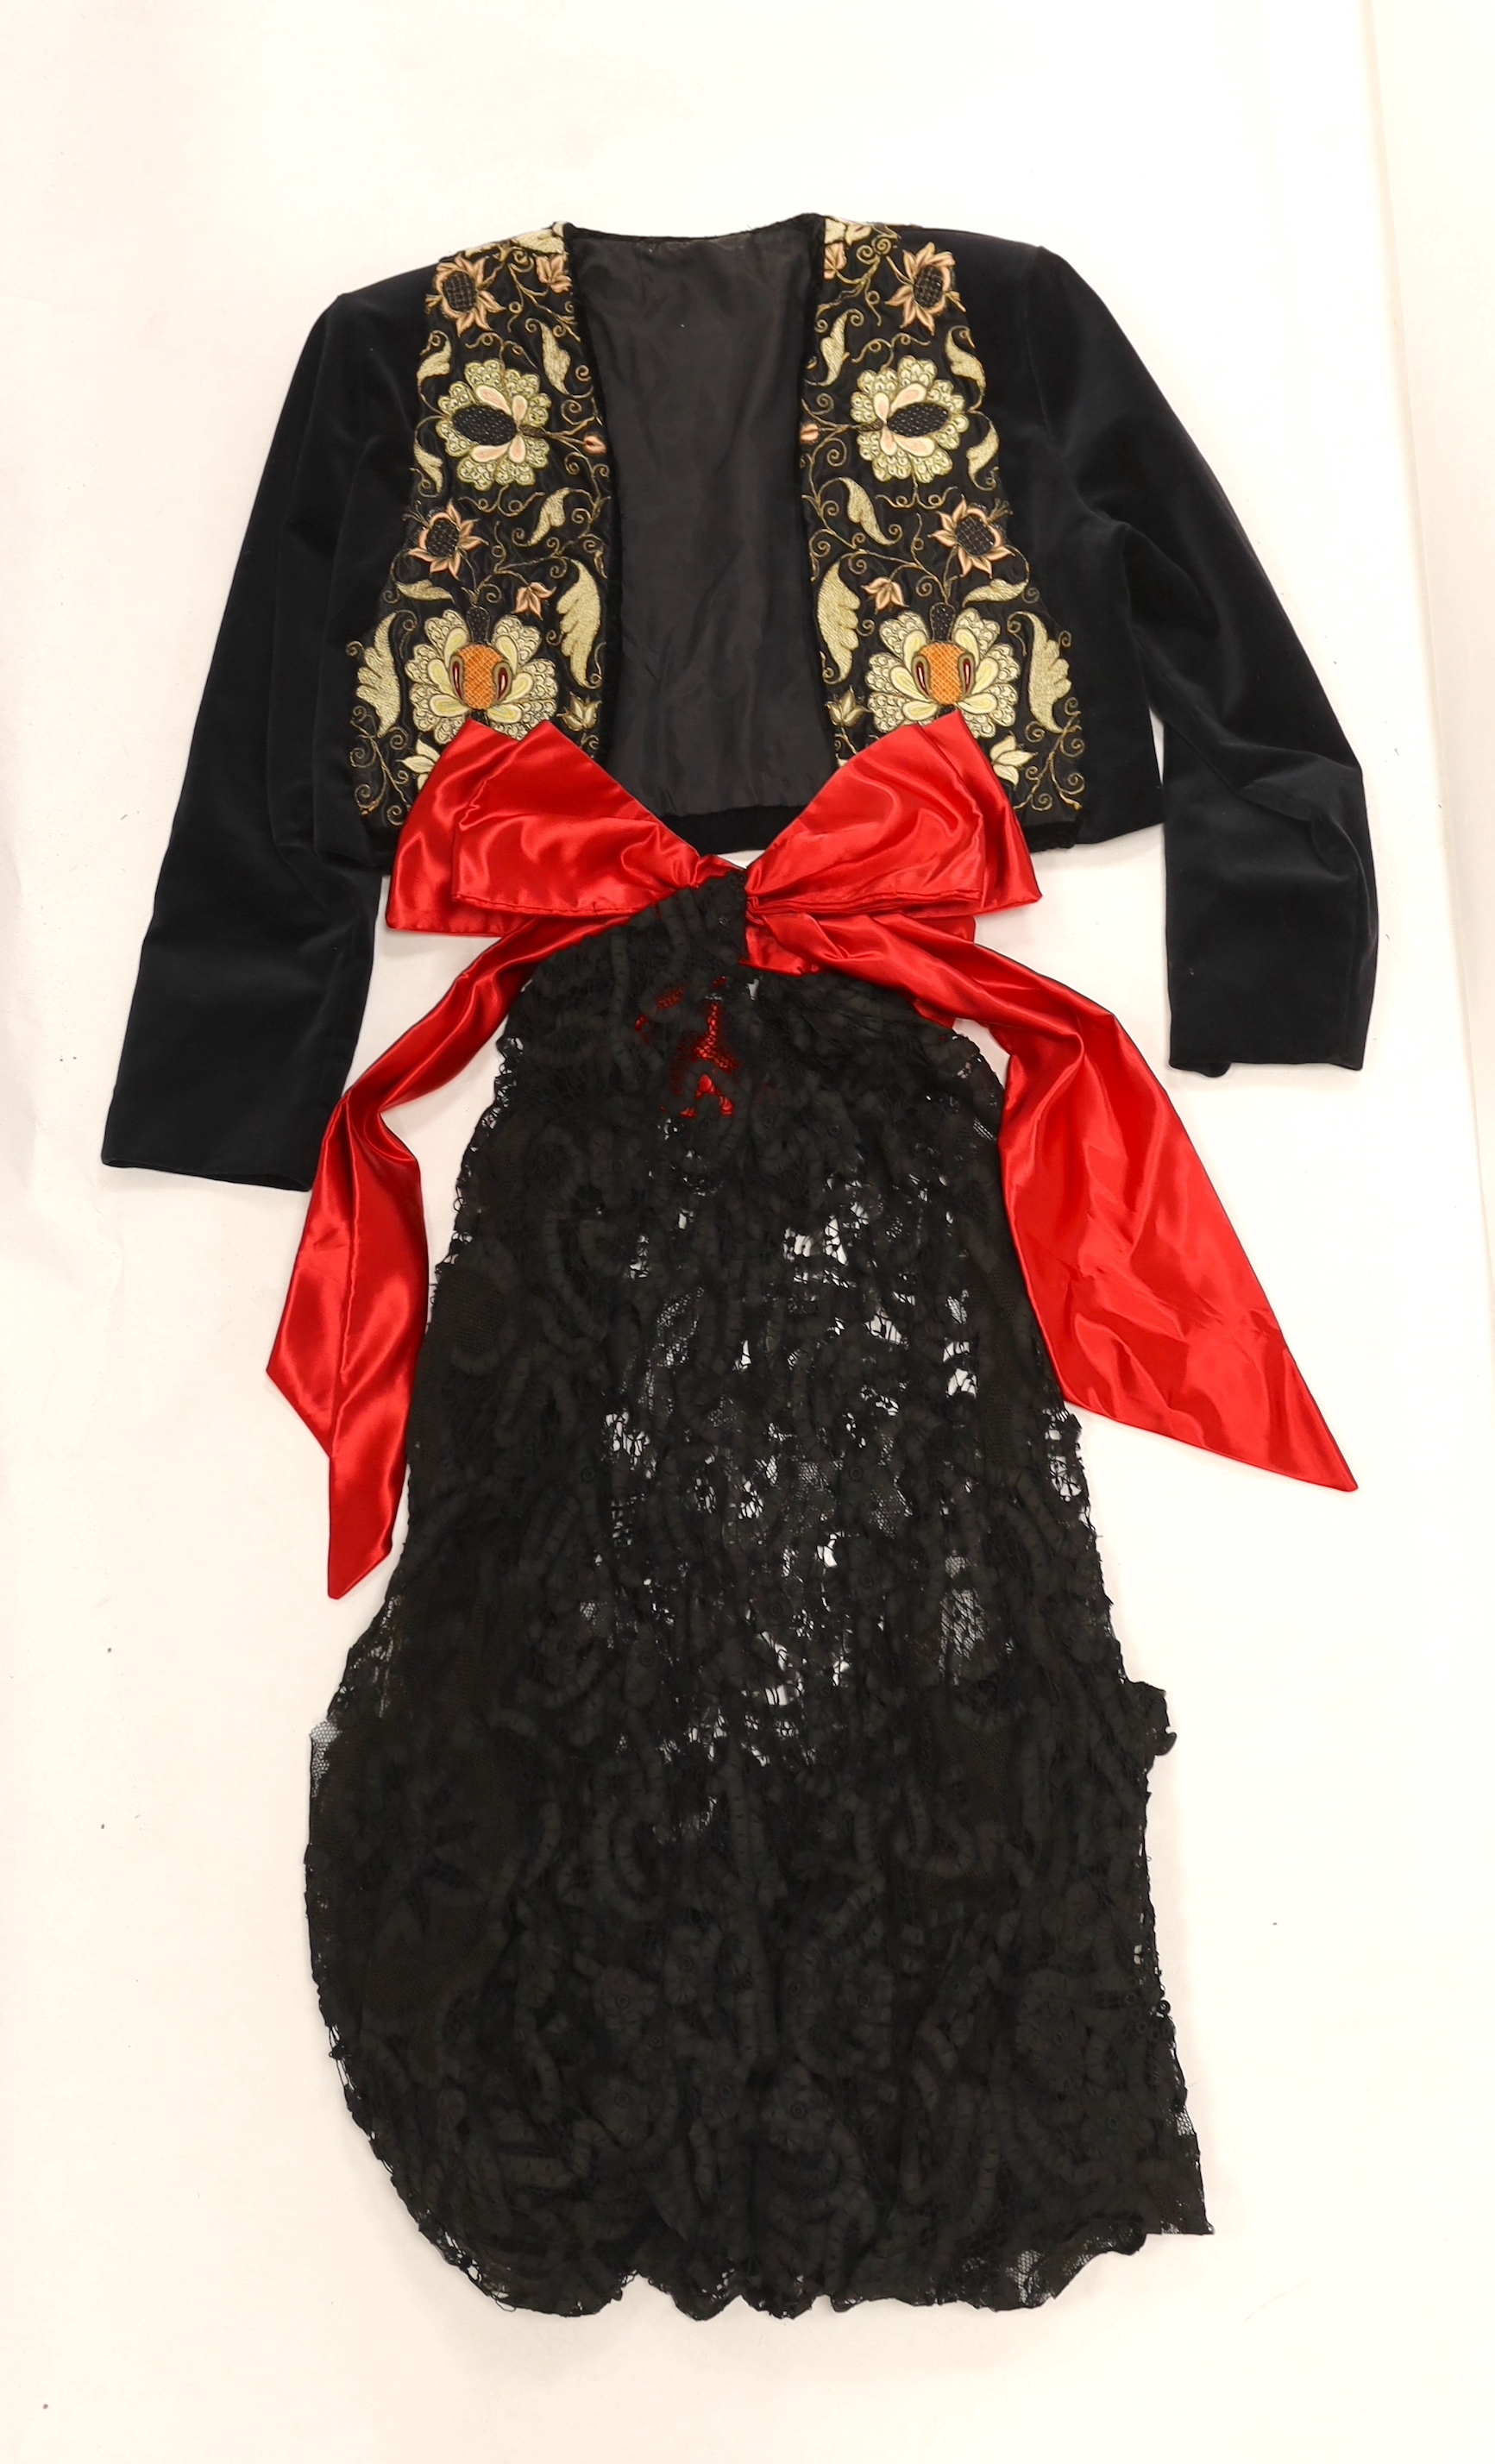 A velvet bolero with ornate polychrome silk embroidered and beaded panels, together with a full length black tape lace evening skirt (some damage) with red satin waisted sash